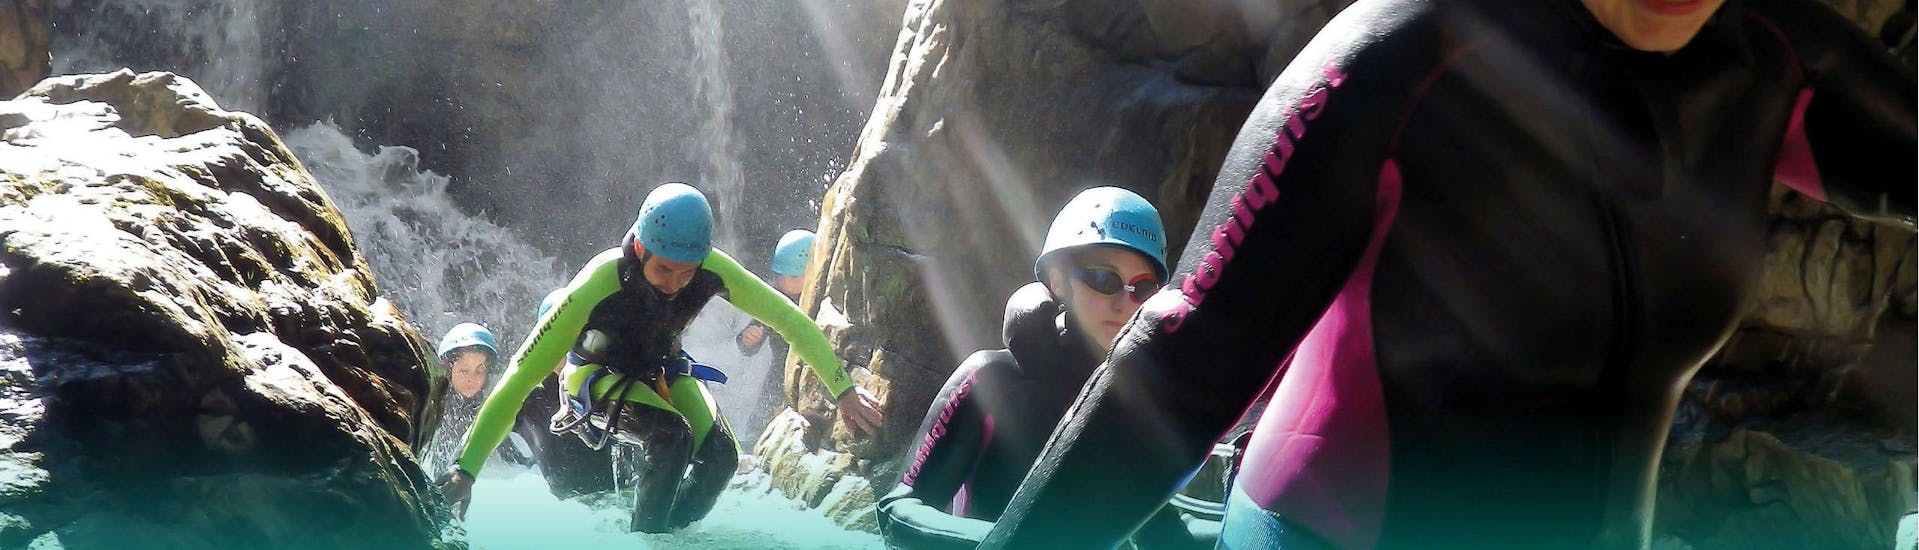 People climbing at Canyoning in East Tyrol - First Step Tour with Adventurepark Osttirol.